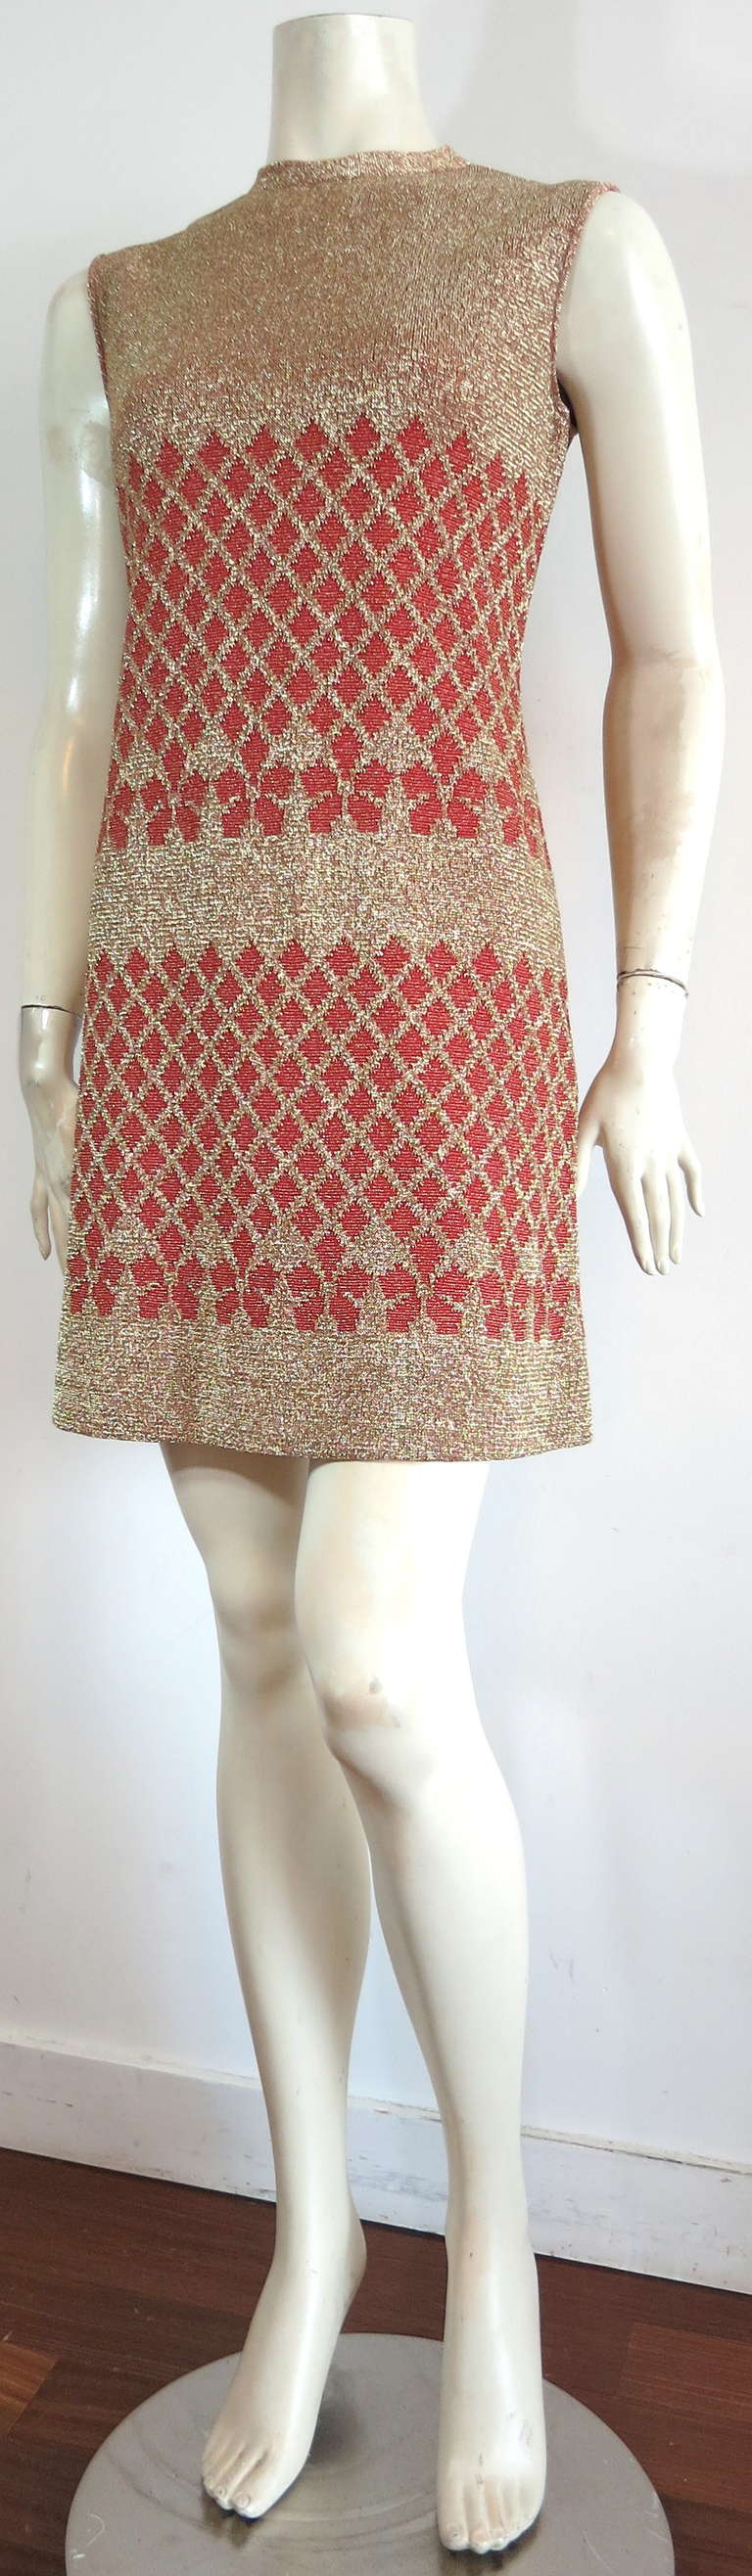 Mint condition PIERRE BALMAIN PARIS Les Tricots knit dress.

This stunning dress was designed by Pierre Balmain in France during the 1960's.

The tricot knit dress features gorgeous, engineered lattice, bow style artwork with metallic gold &